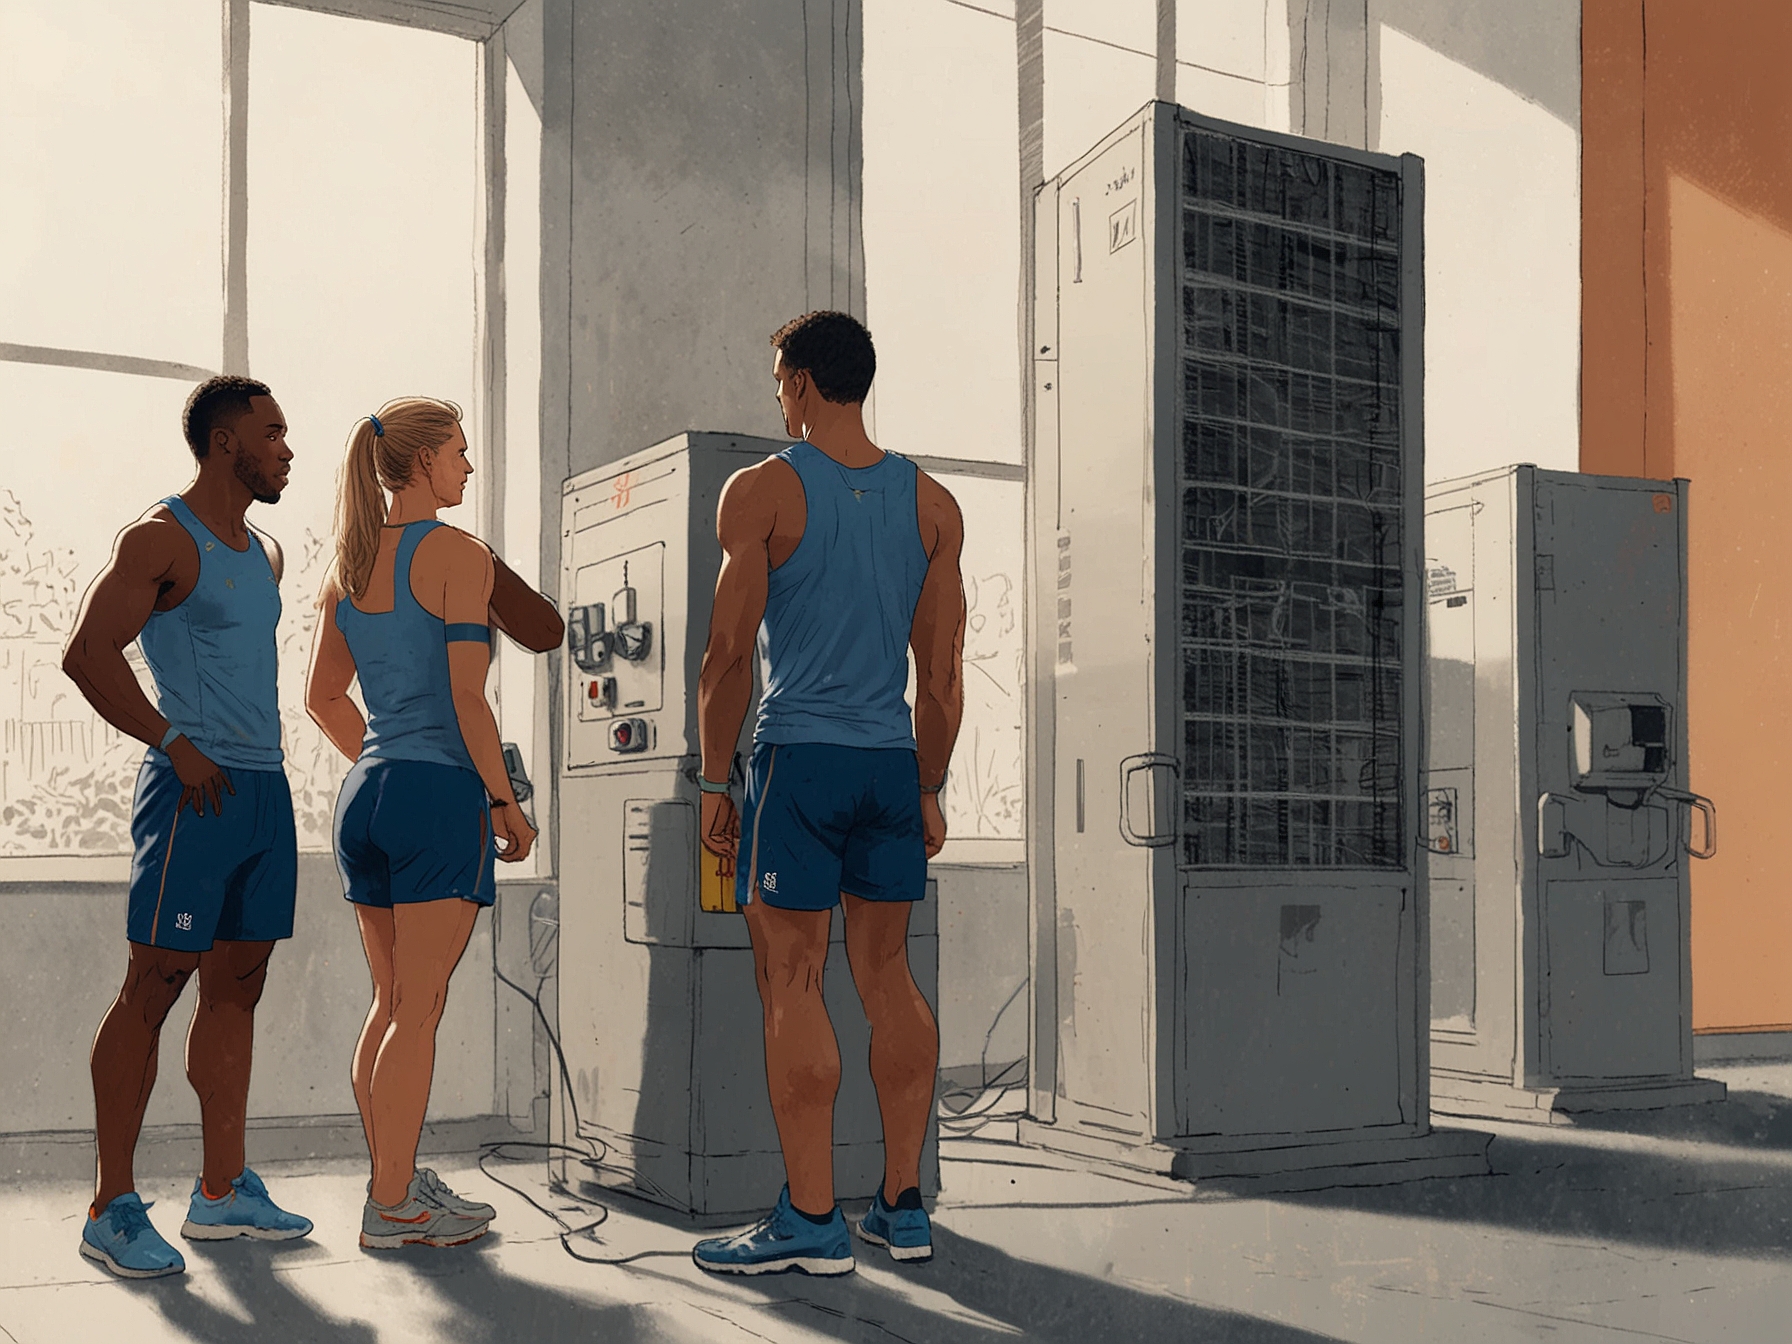 A group of US athletes preparing for the heat of the Paris 2024 Olympics, showcasing the implementation of air conditioning units and other heat management strategies to maintain peak performance and health.